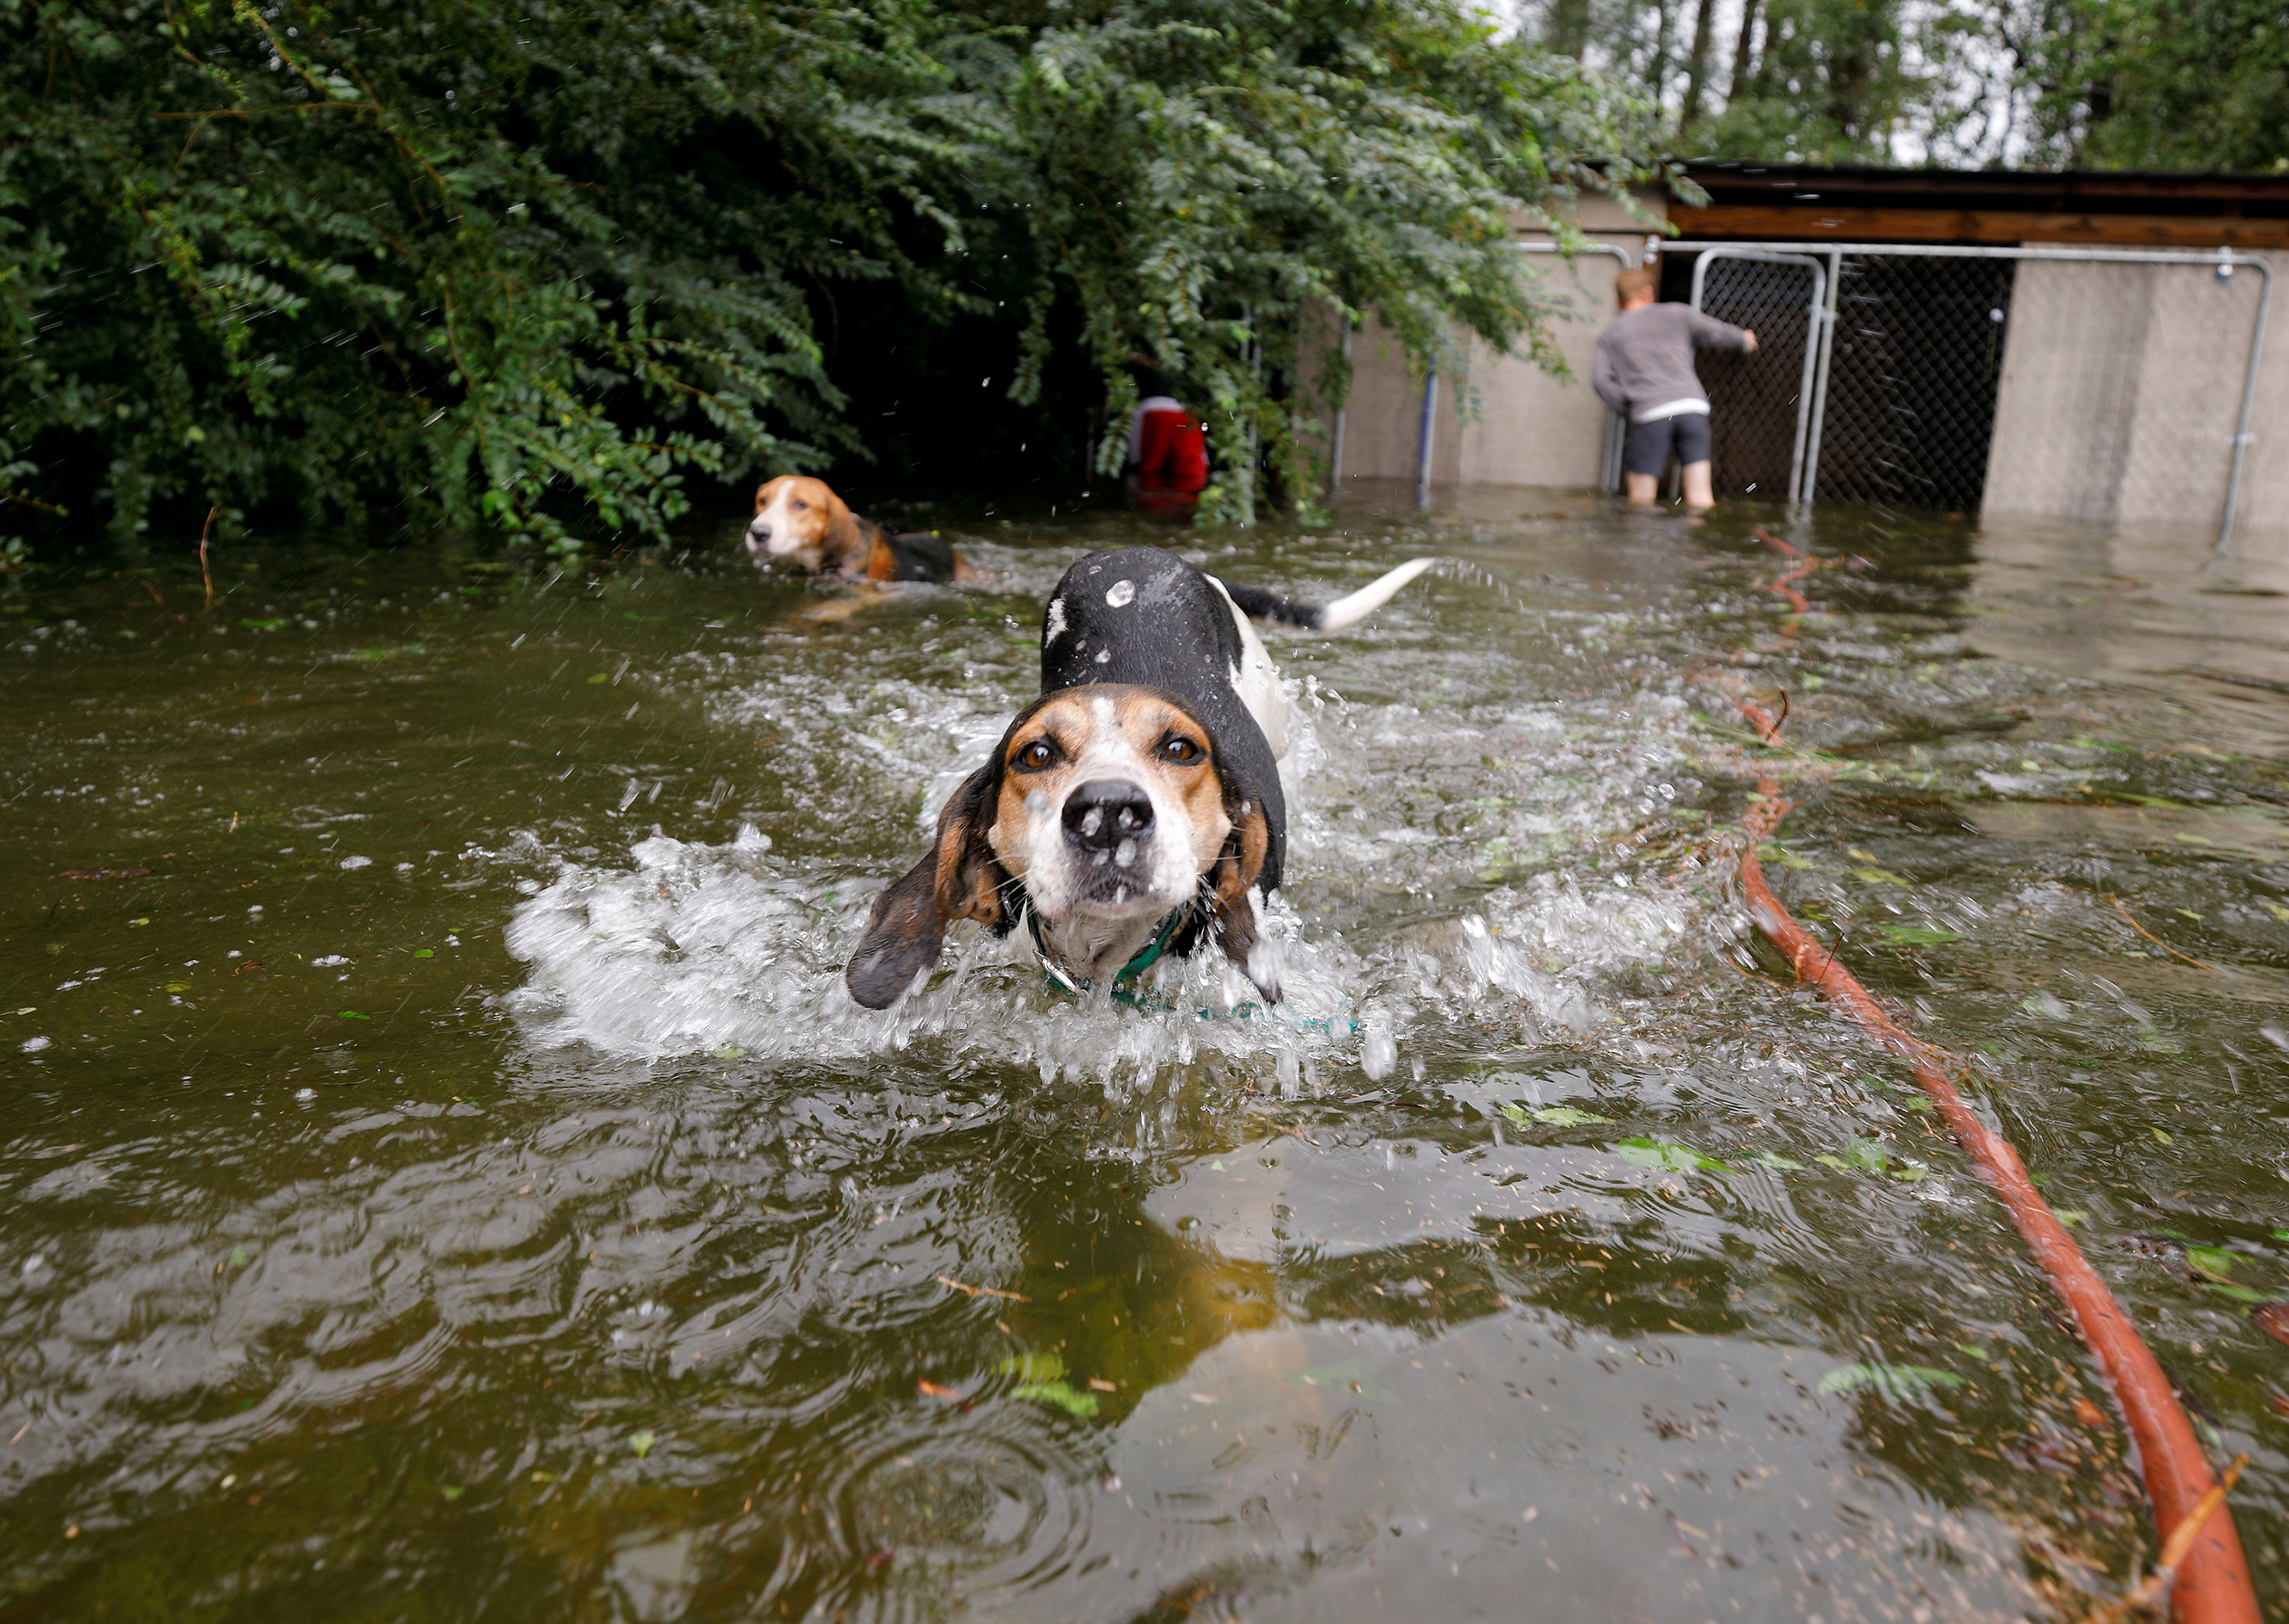 Panicked dogs that were left caged by an owner who fled rising flood waters in the aftermath of Hurricane Florence, swim free after their release in Leland, North Carolina, U.S., September 16, 2018. REUTERS/Jonathan Drake TPX IMAGES OF THE DAY